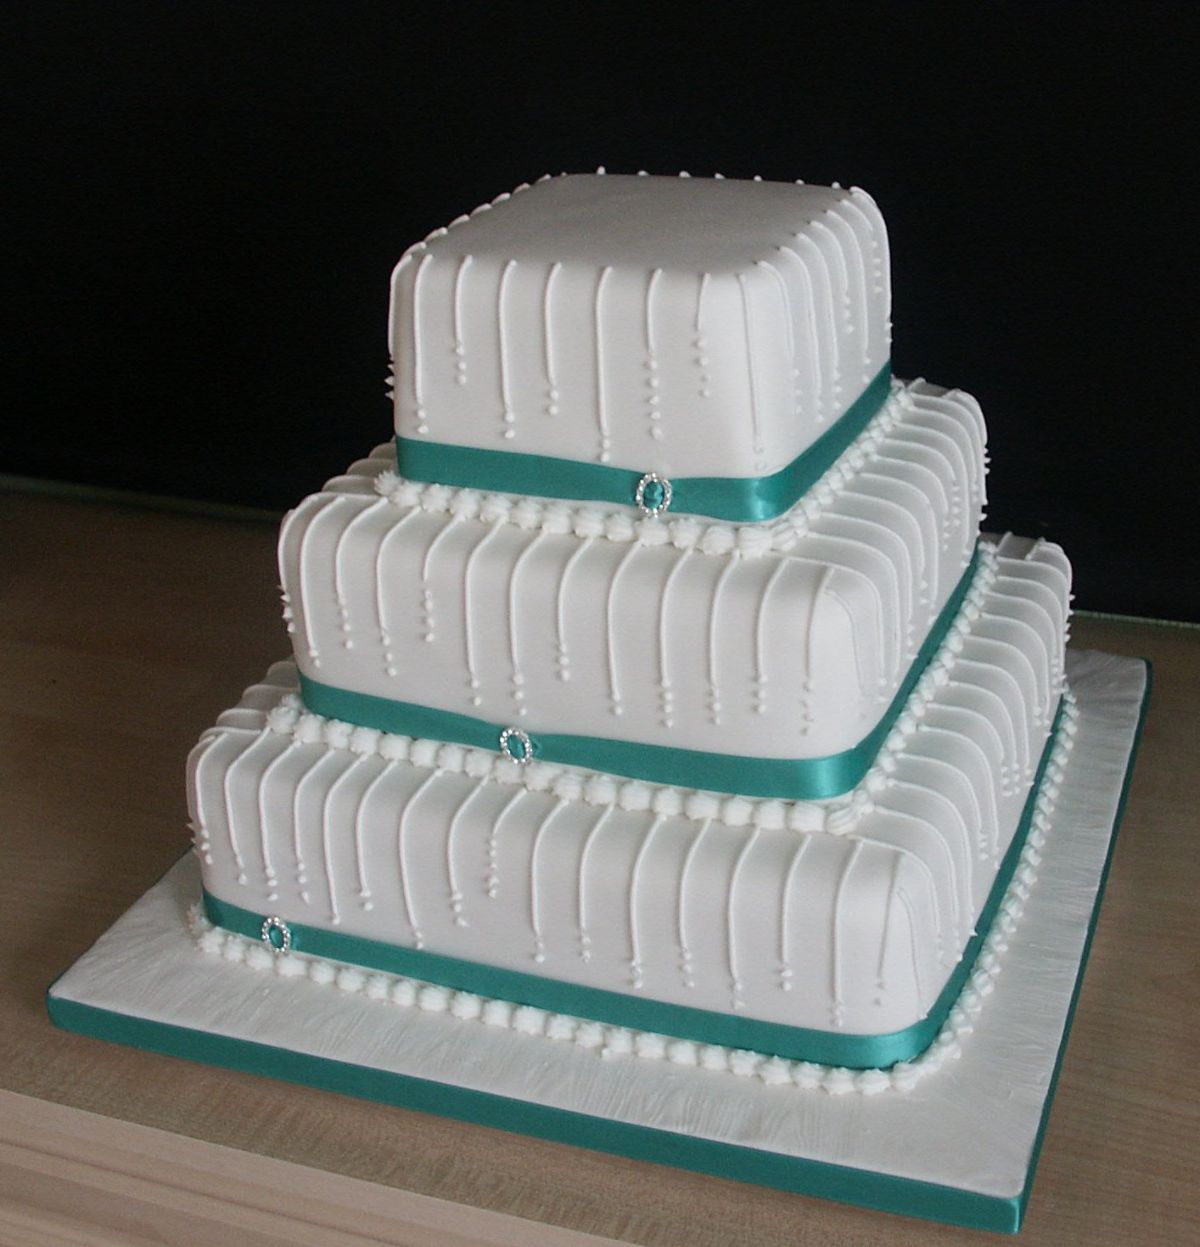 Annes Cakes For All Occasions-Image-115